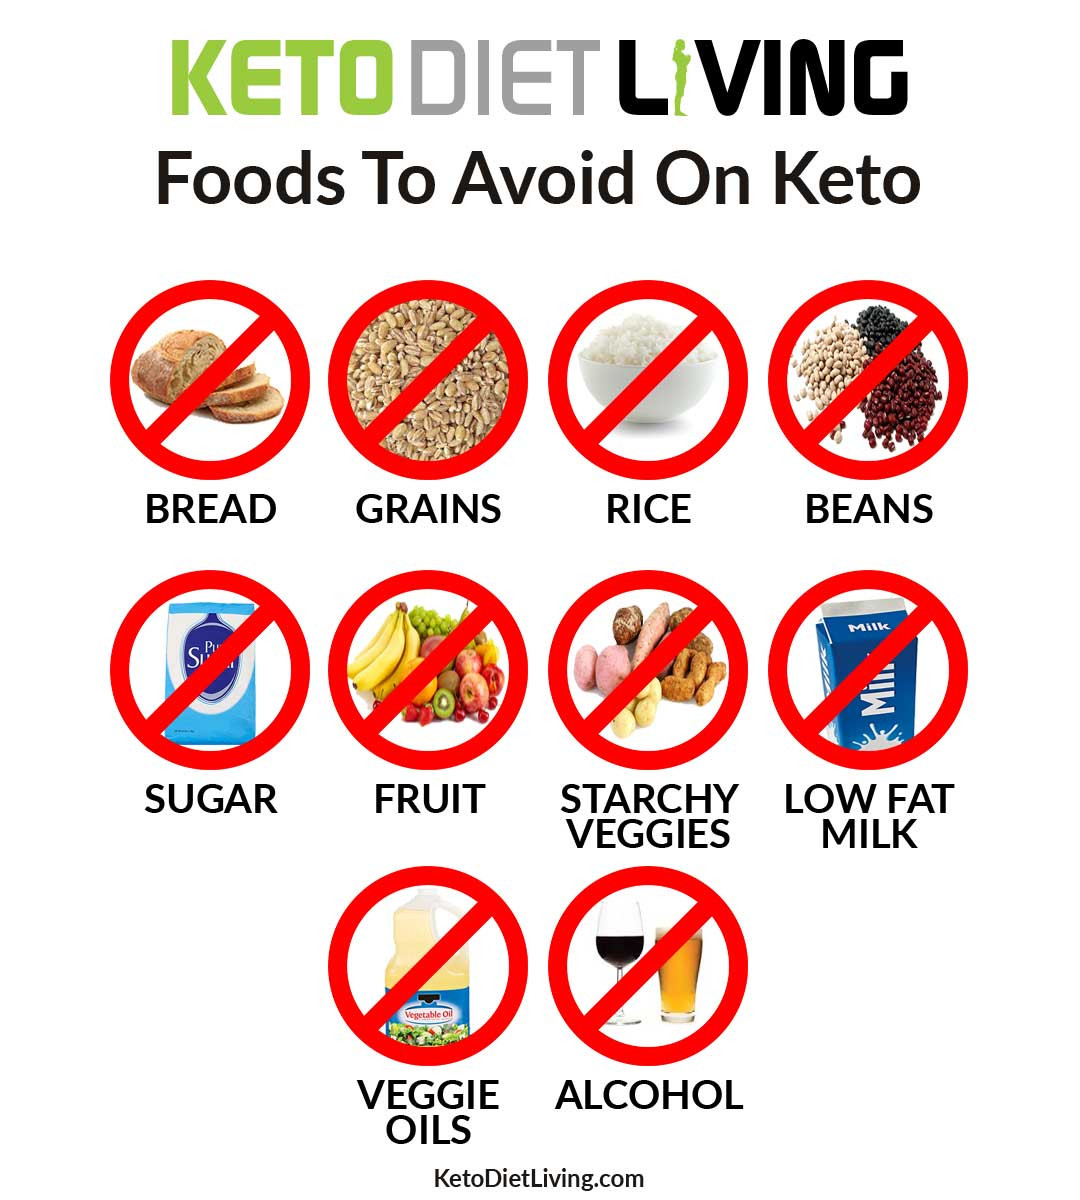 Foods To Avoid On Keto Diet How Many Carbs Should You Eat Each Day to Get I...